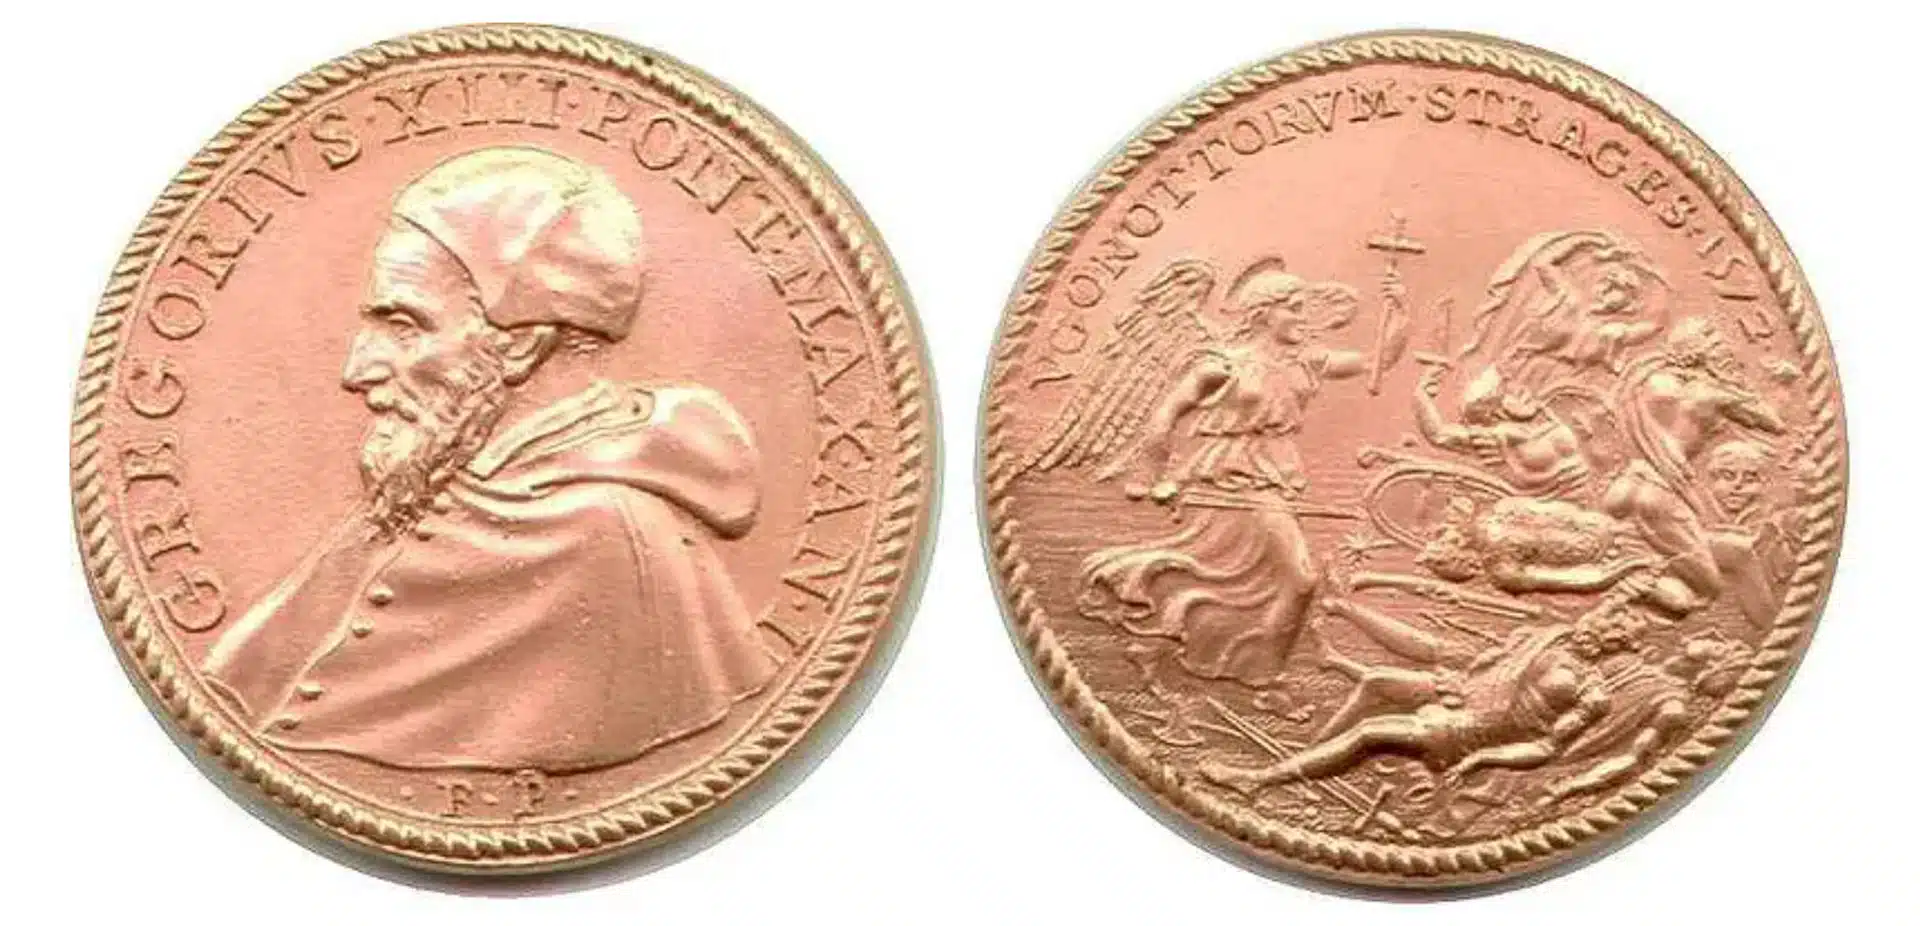 Bloodbath coin commemorating the murder-massacre of the French Huguenots 1572